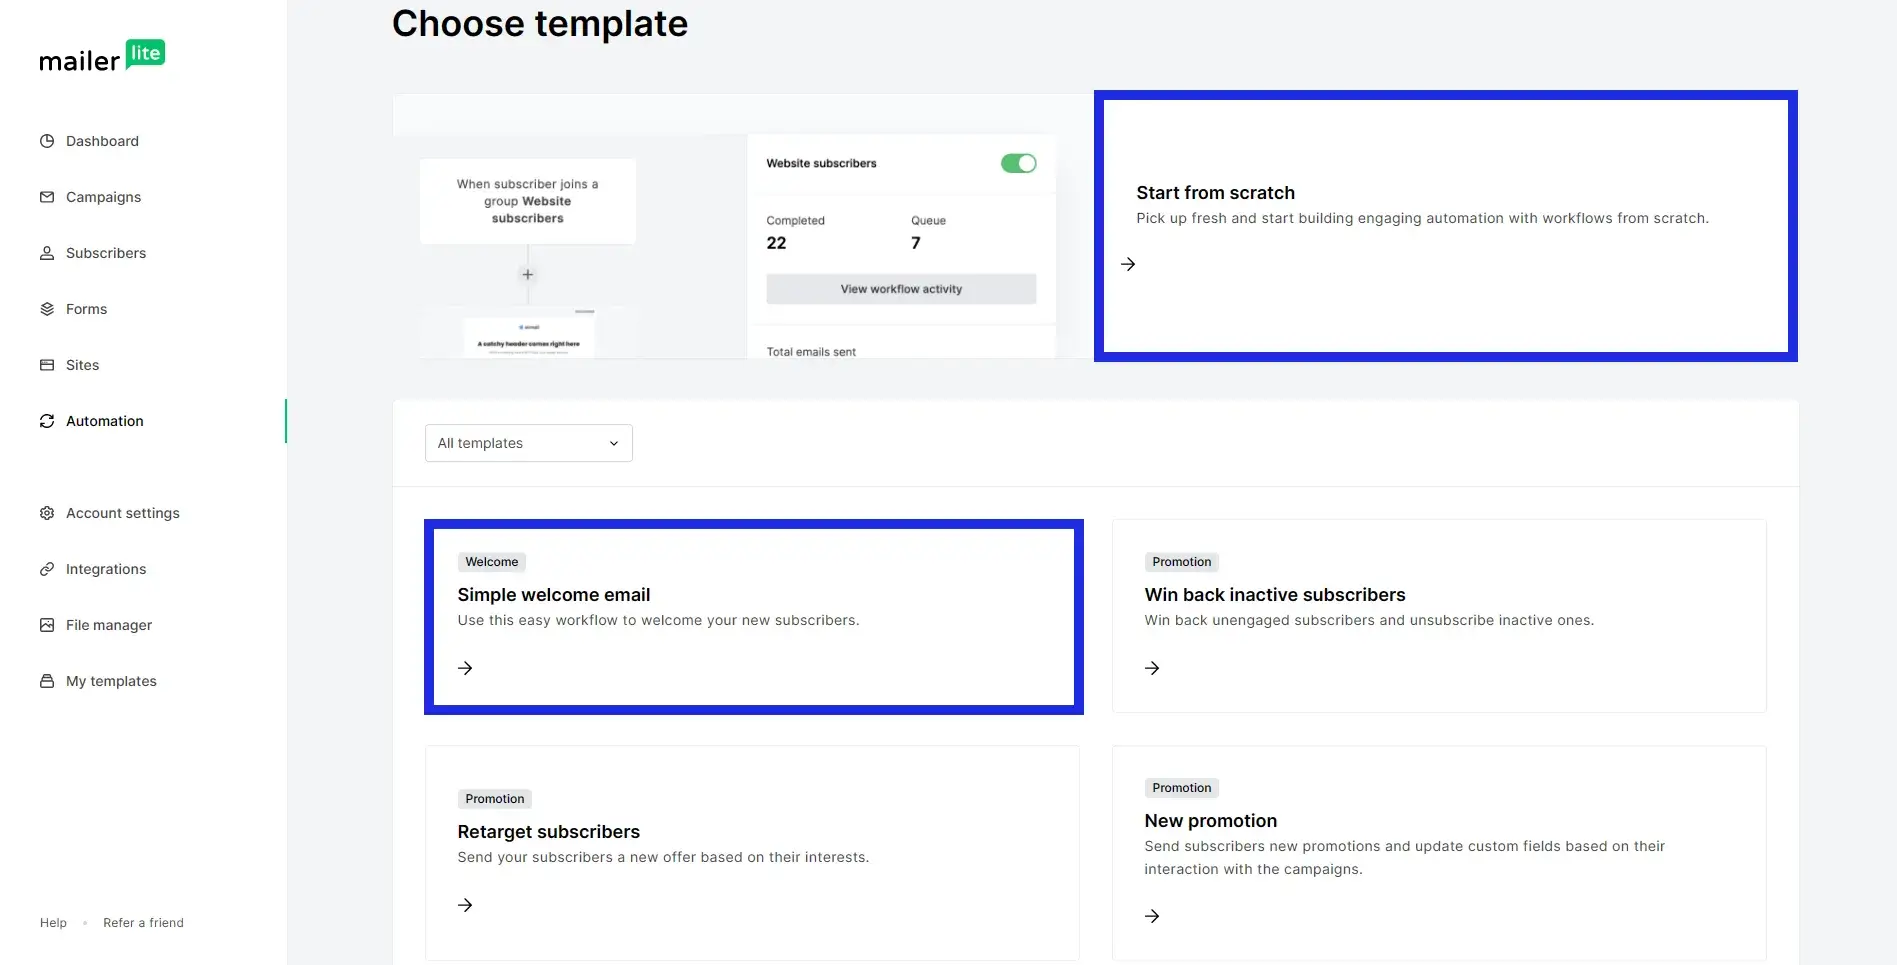 Email Automations: Choose an email template in mailerlite